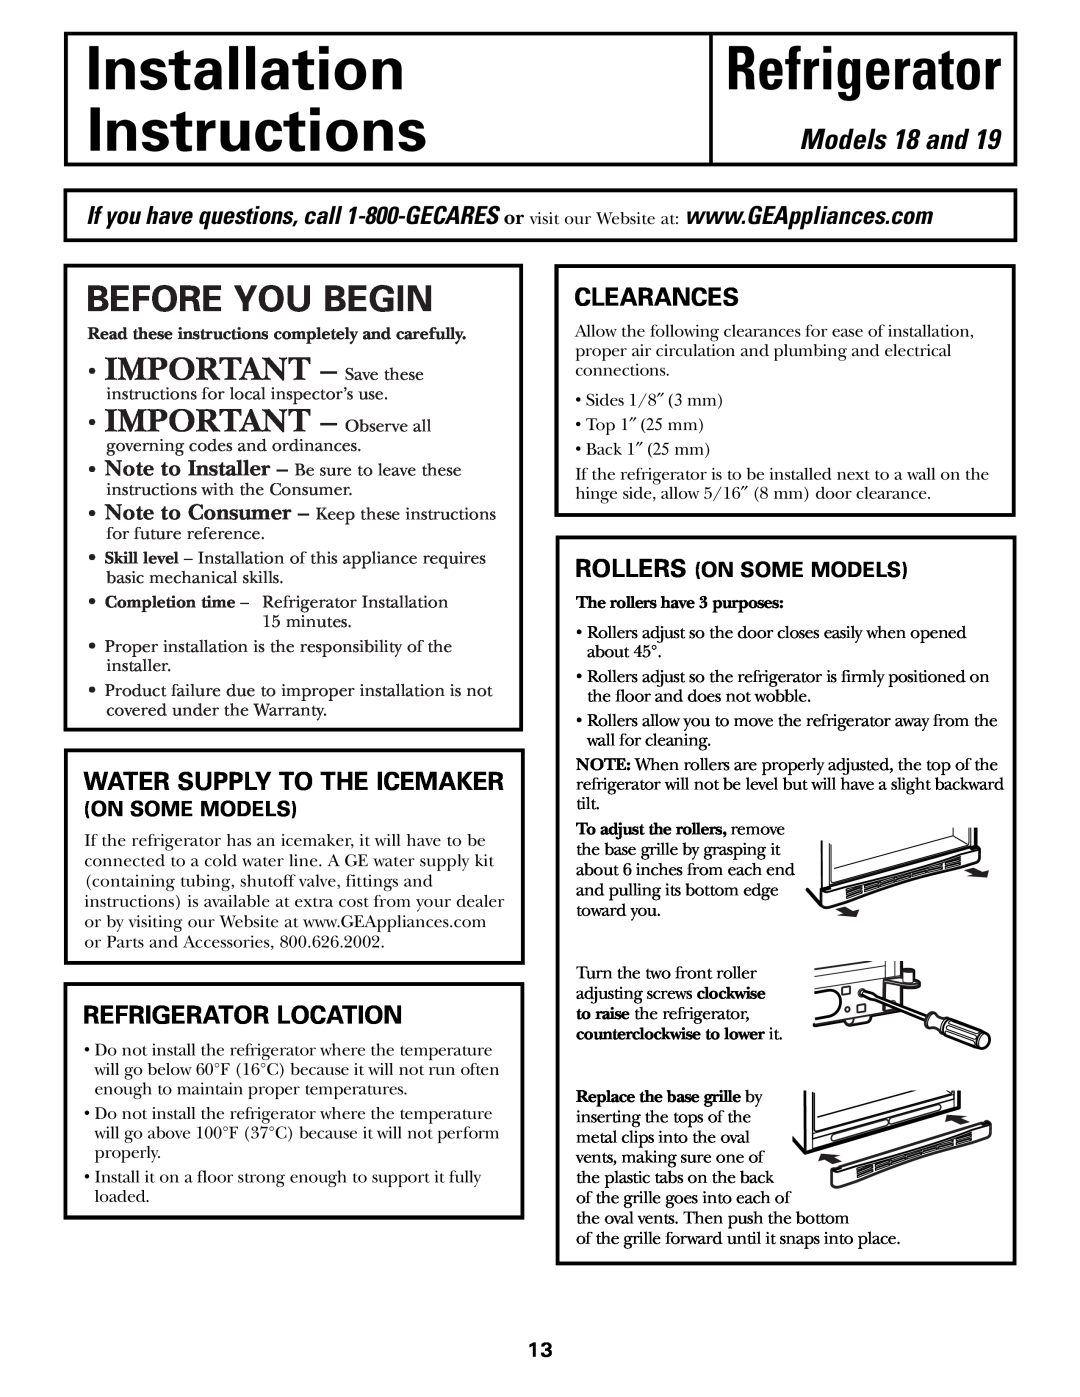 GE 197D3354P003 Installation Instructions, Refrigerator, Before You Begin, Models 18 and, Water Supply To The Icemaker 